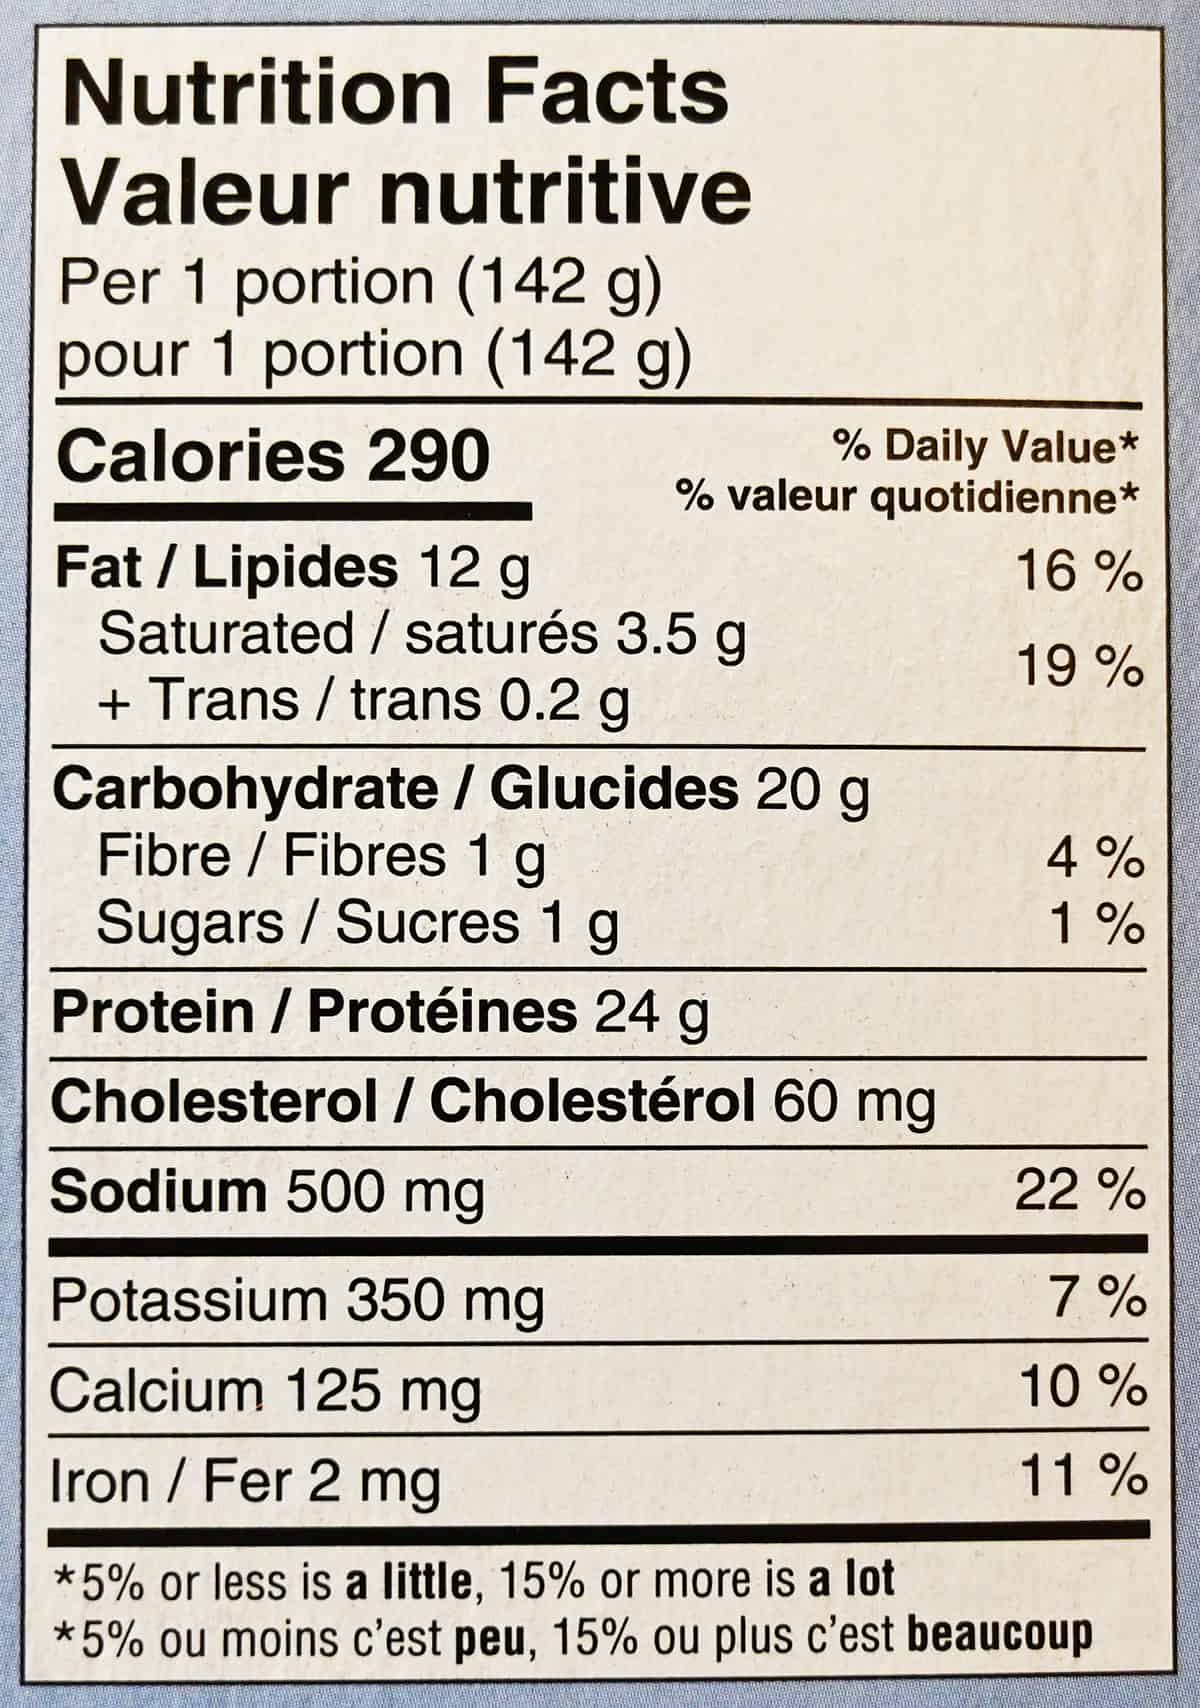 Image of the nutrition facts for the chicken breasts from the back of the box.